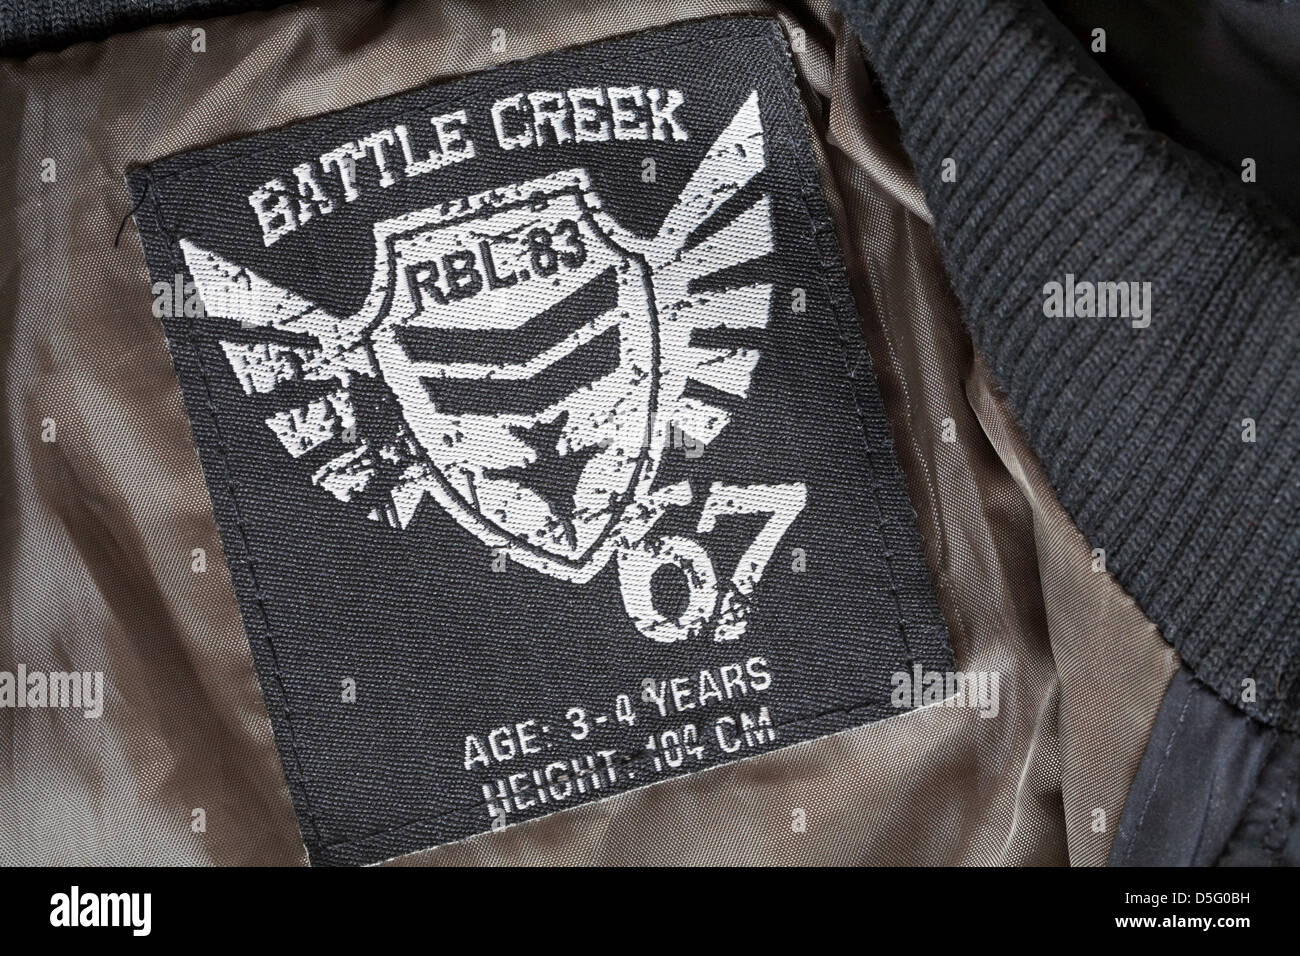 Battle Creek label in boys jacket garment clothing sold in the UK United Kingdom Great Britain Stock Photo